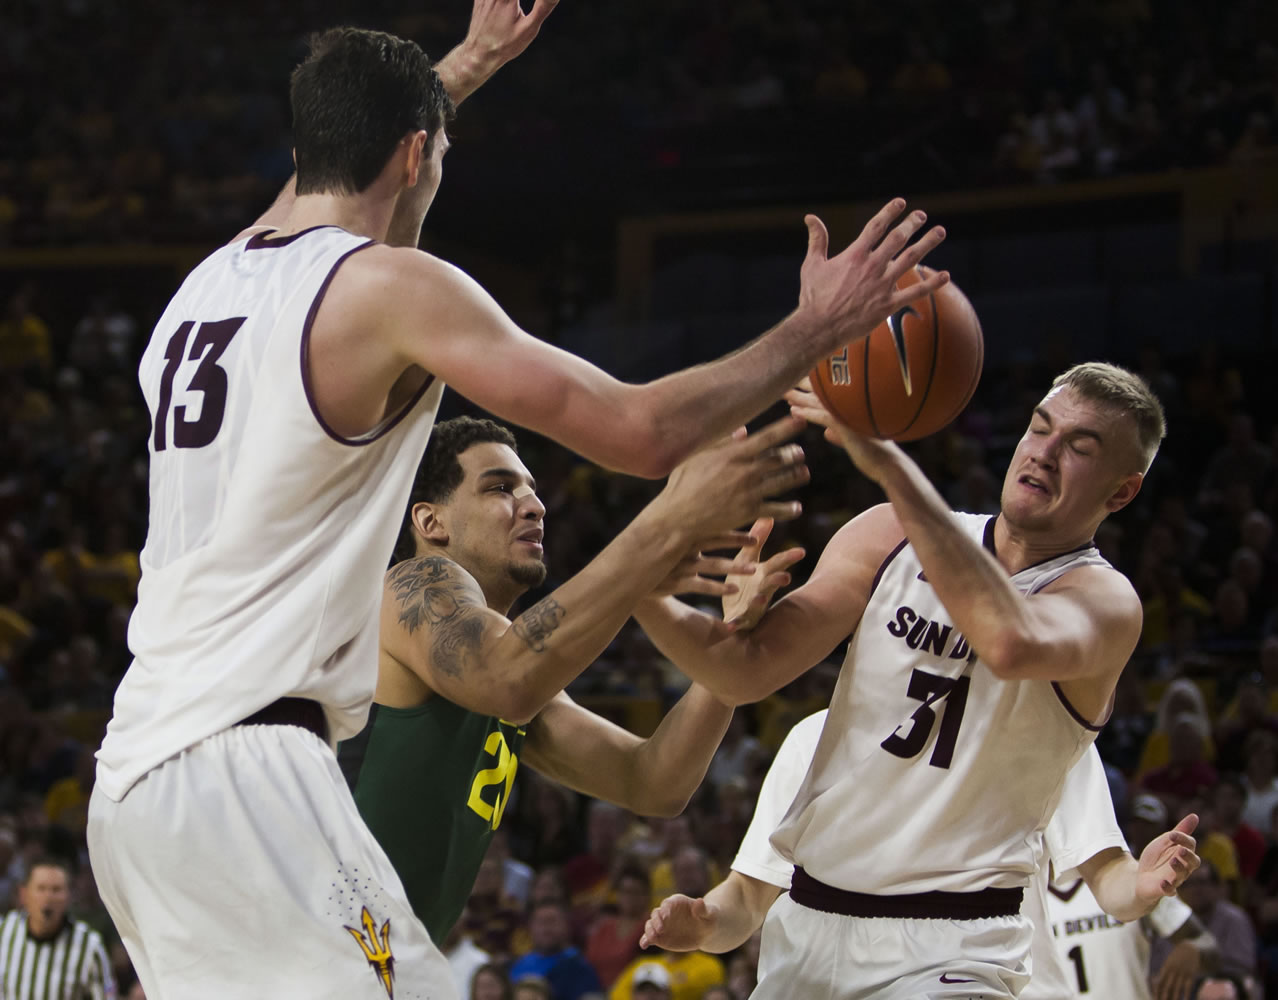 Oregon center Waverly Austin, center, and Arizona State forward Jonathan Gilling, right, try to control of the ball during Saturday's Pac-12 Conference game at Tempe, Ariz.